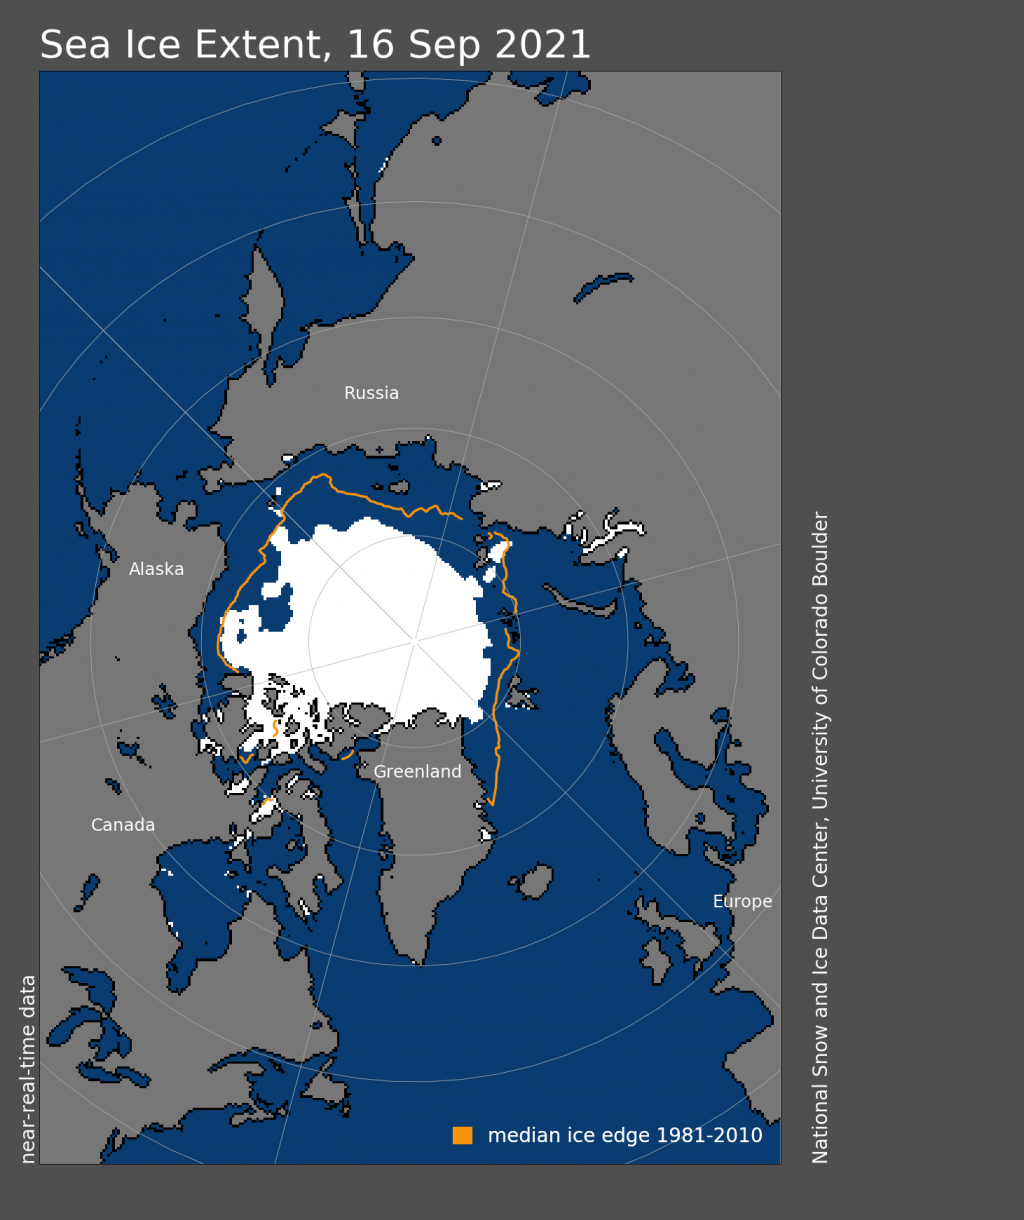 Sea ice extent in the Arctic